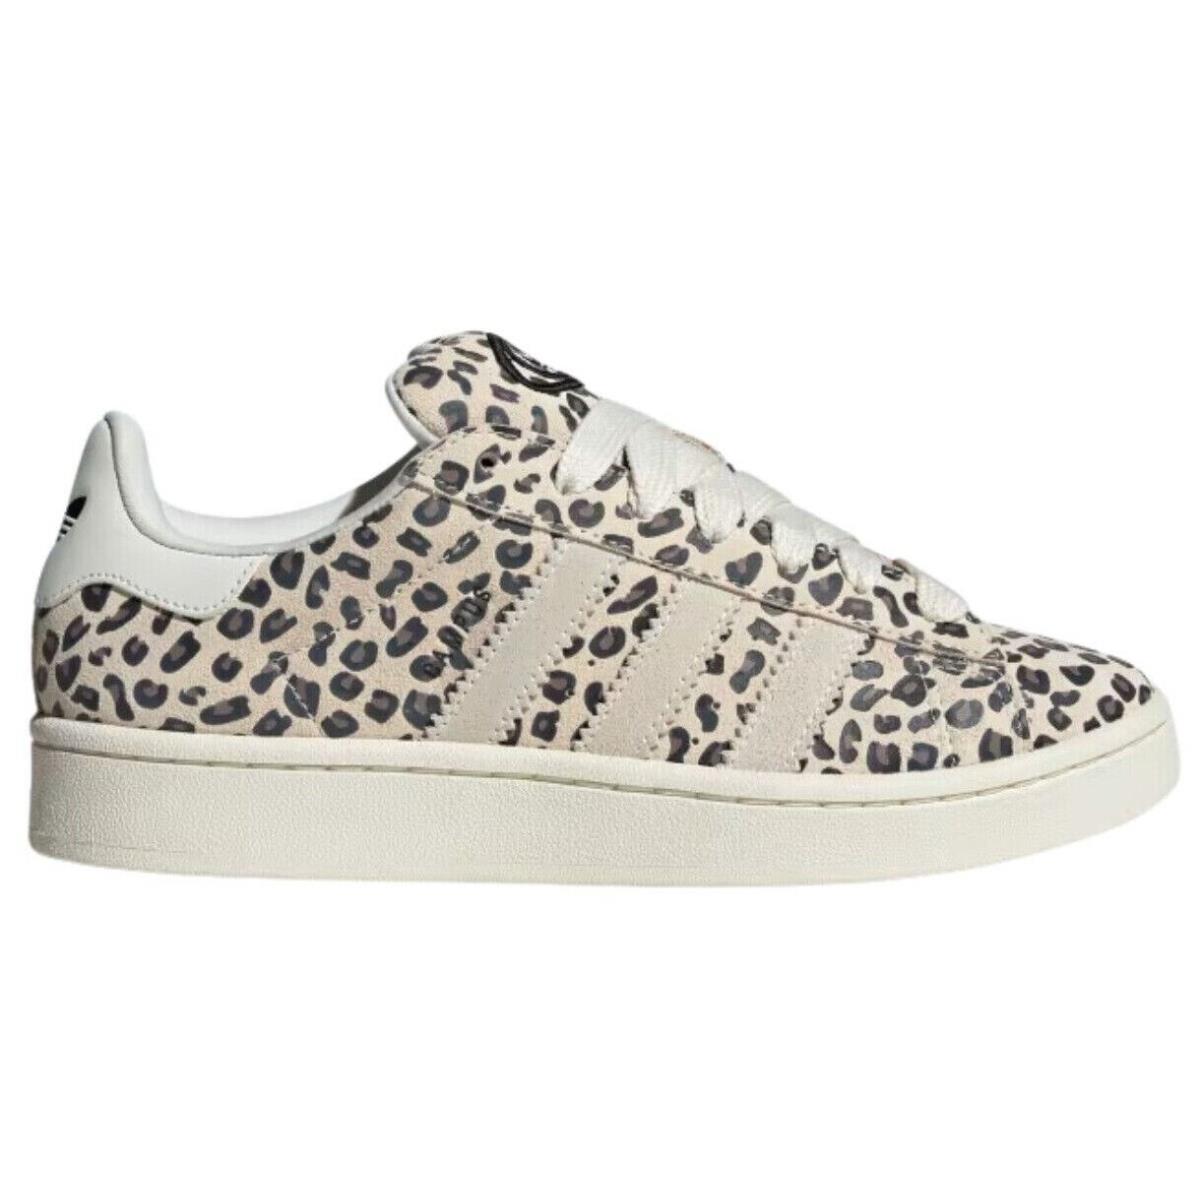 Adidas Originals Campus 00S Women`s Casual Shoes All Colors US Szs 5-11 Leopard Pattern / Off White / Black